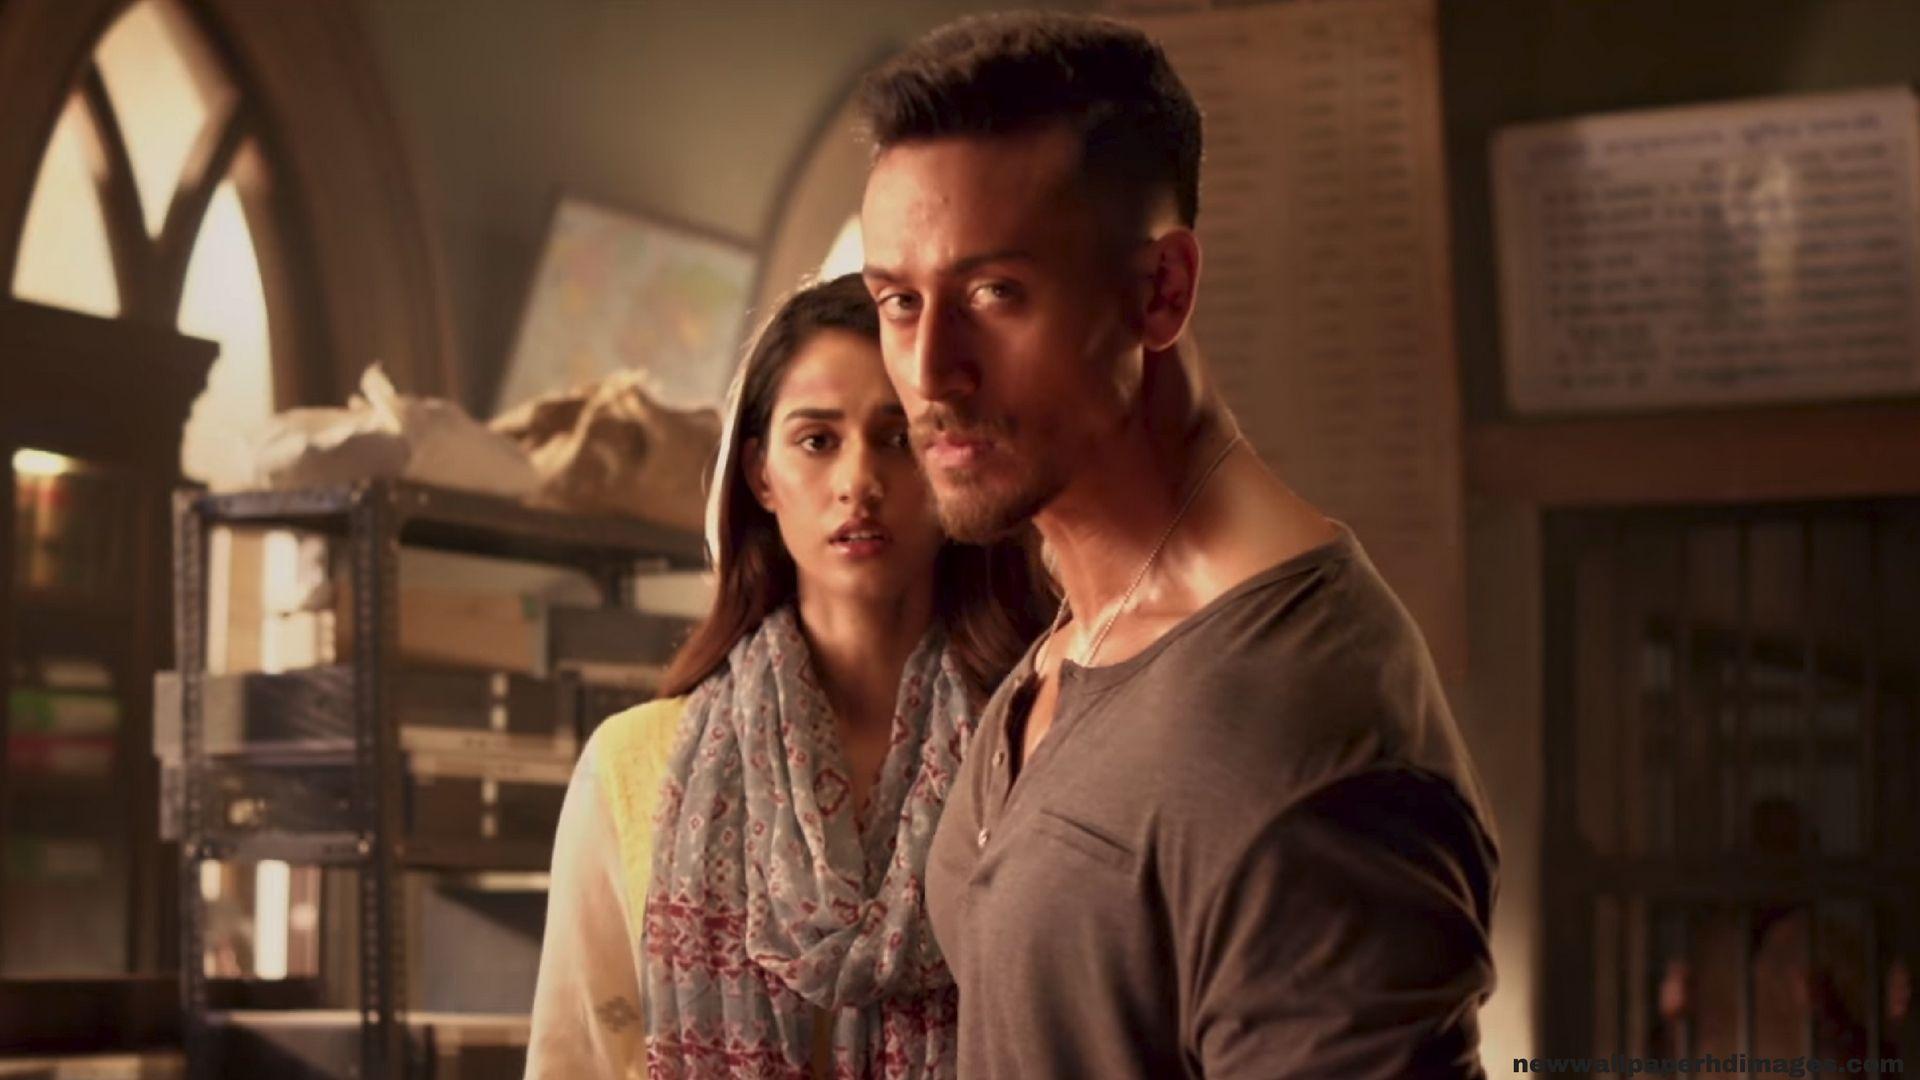 Movie Baaghi 2 Free HD Wallpaper And Image Download